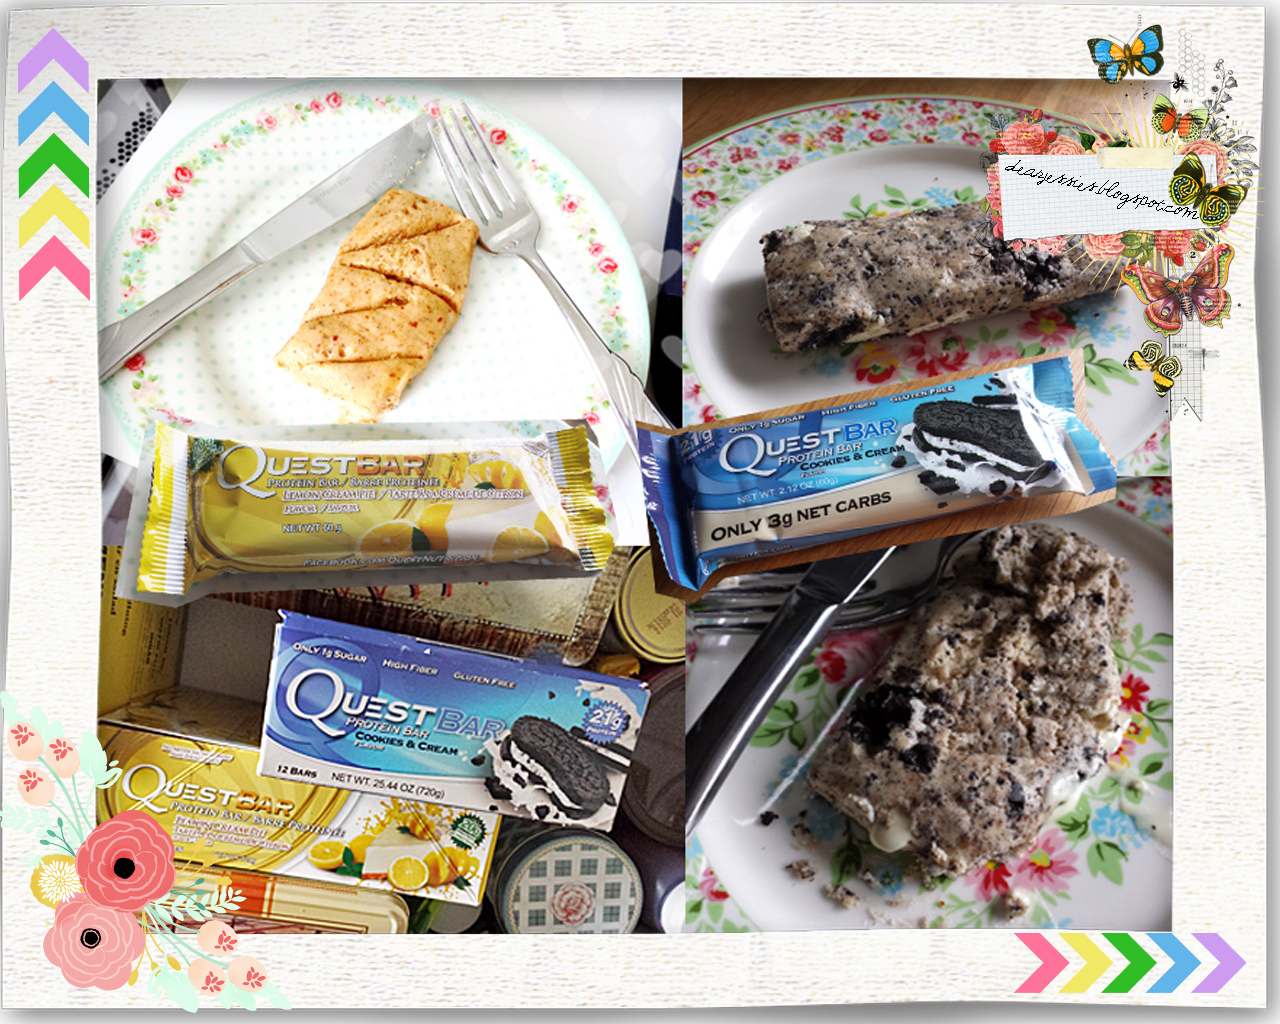 #cheatclean, Questbars, Quest, Quest cookies and cream